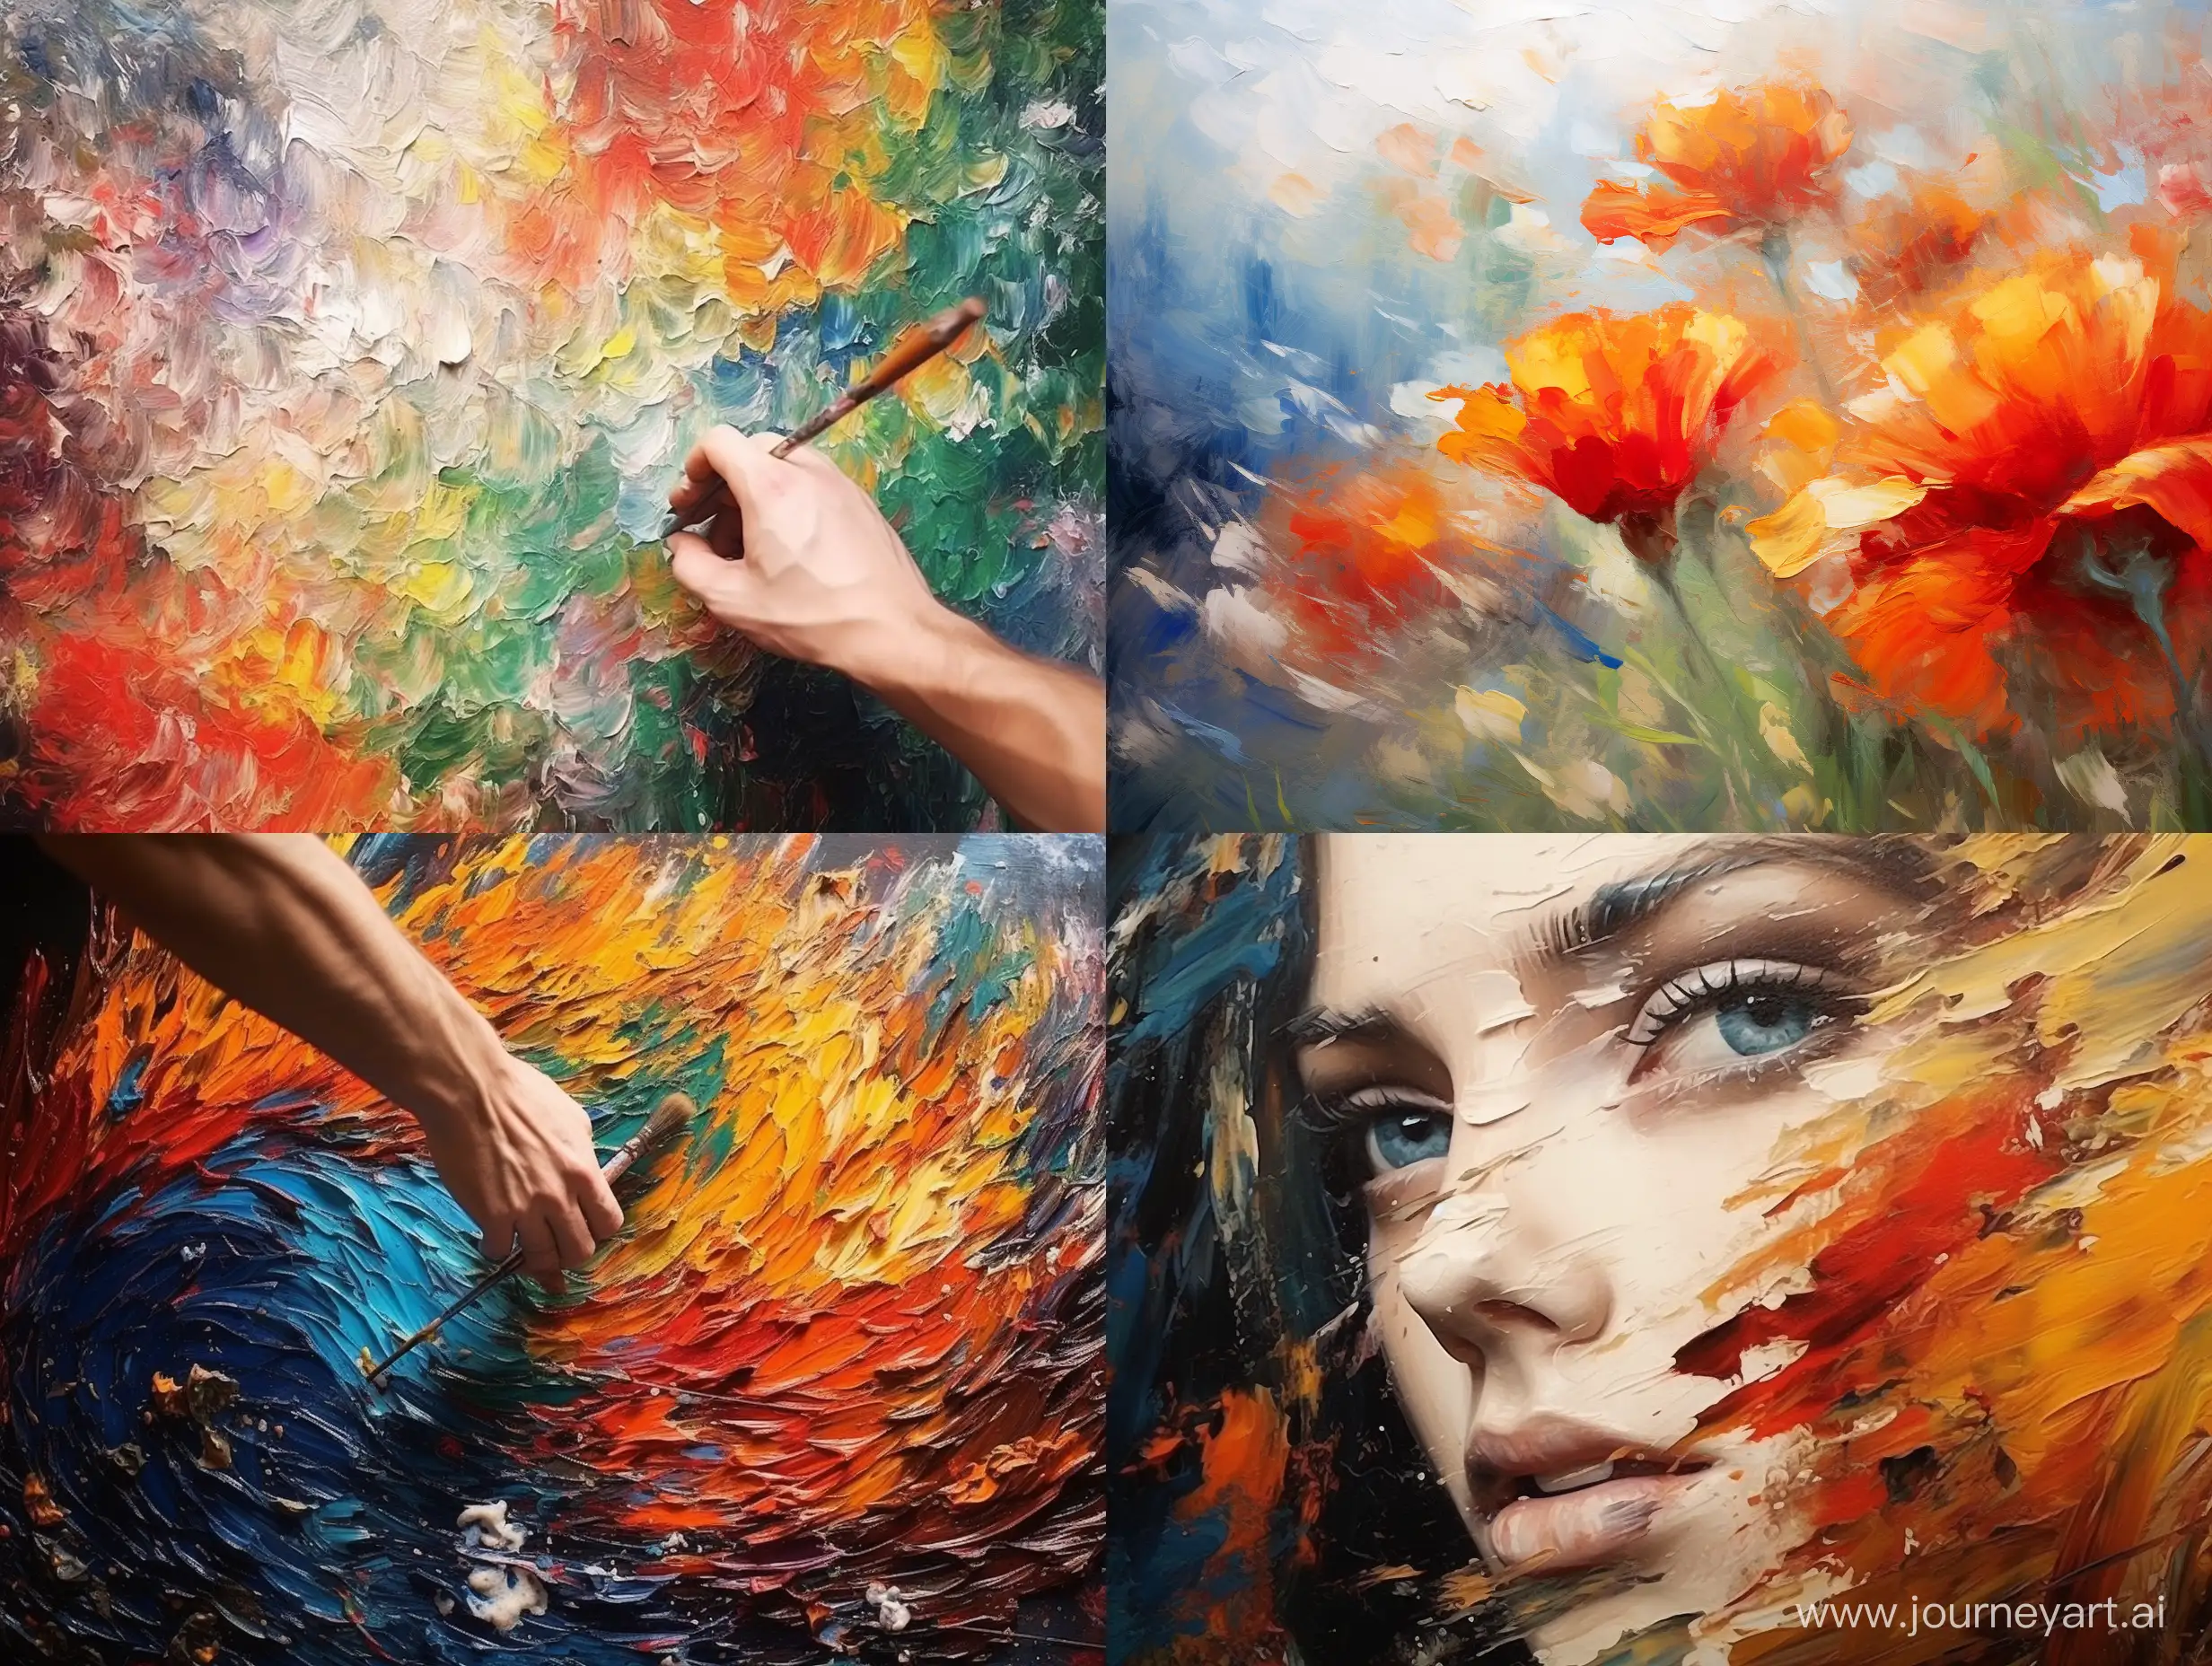 Vibrant-Impressionist-Oil-Painting-CloseUp-with-Laowa-24mm-f14-Lens